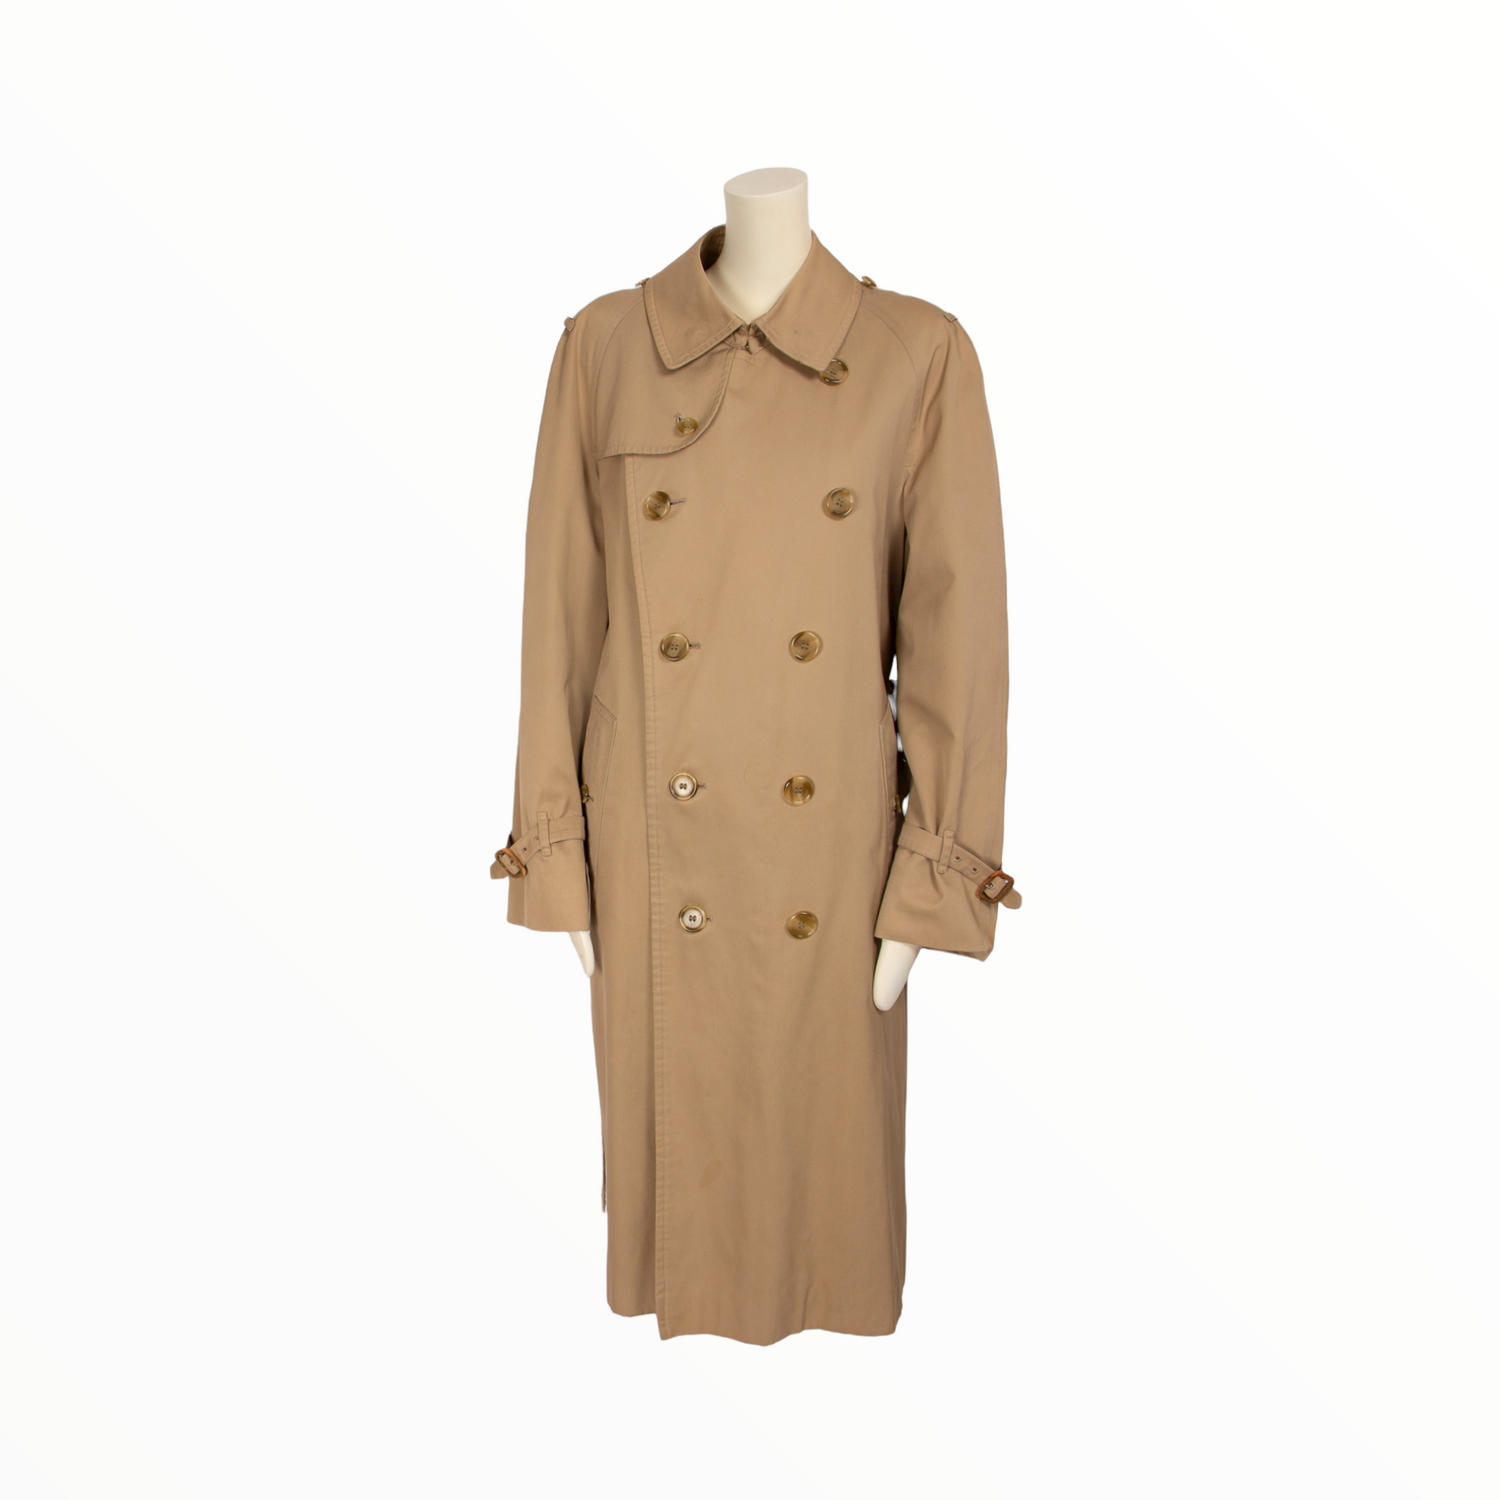 BURBERRY Trench coats vintage Lysis Paris pre-owned secondhand